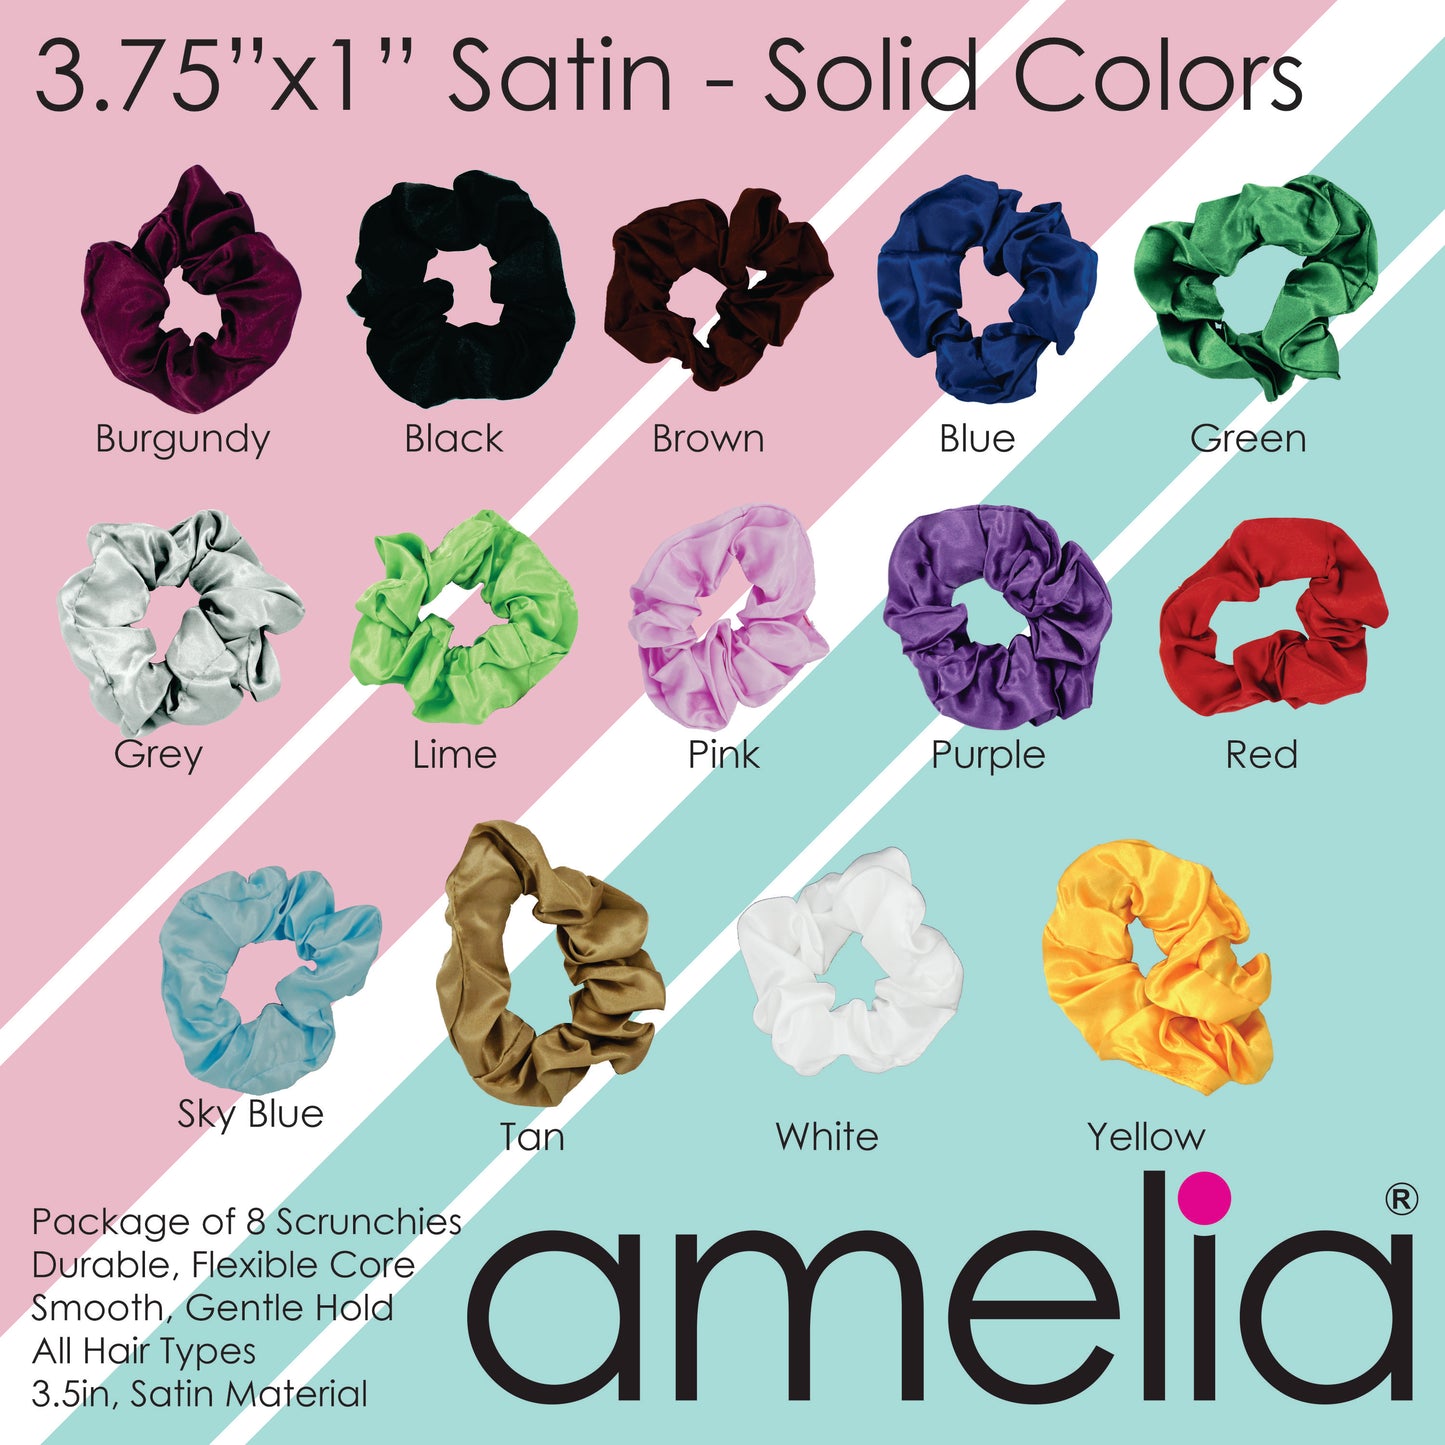 Amelia Beauty Products, Blue Satin Scrunchies, 3.5in Diameter, Gentle on Hair, Strong Hold, No Snag, No Dents or Creases. 8 Pack